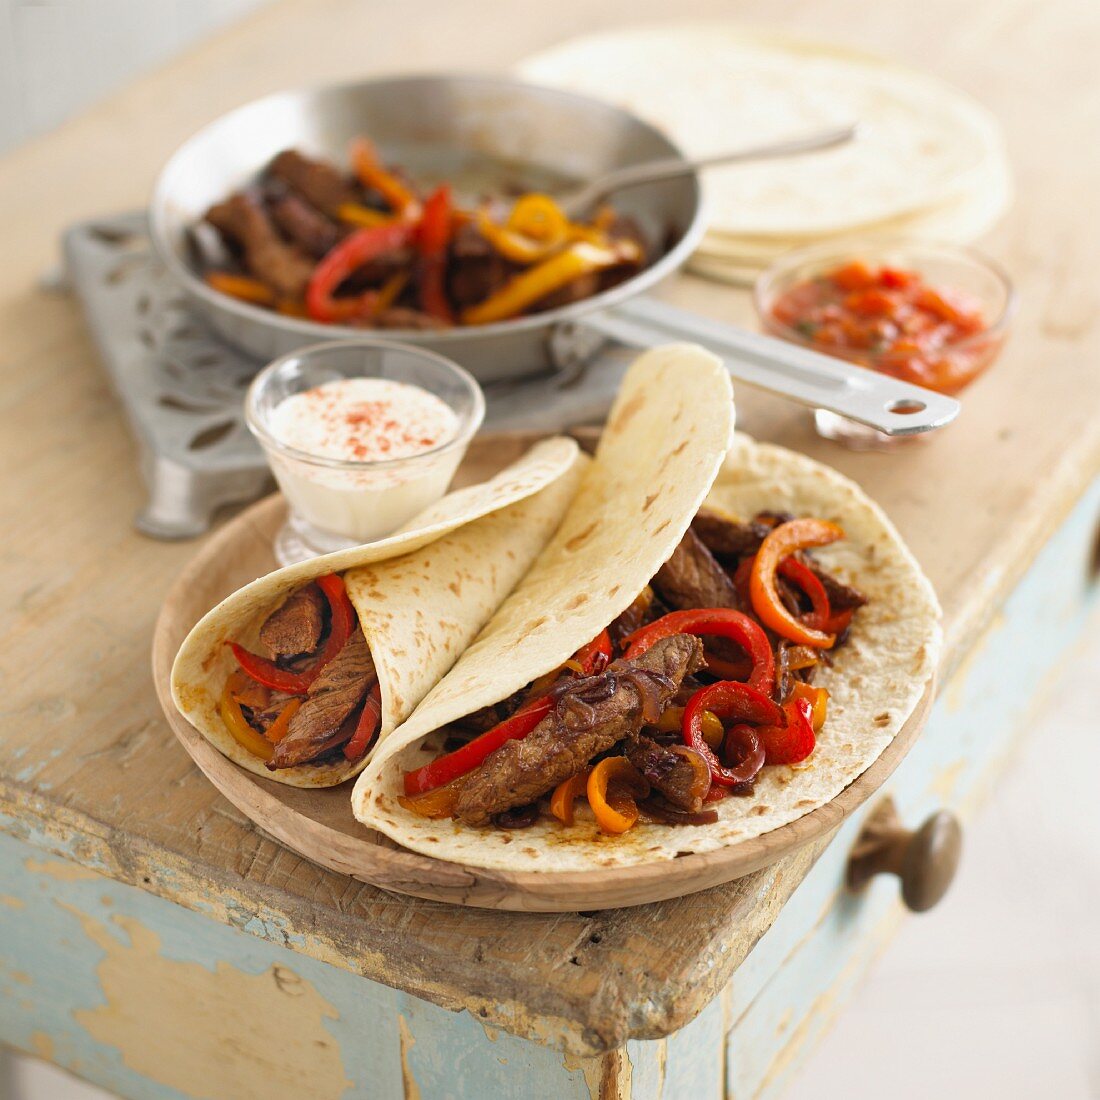 Fajitas with beef and peppers (Mexico)